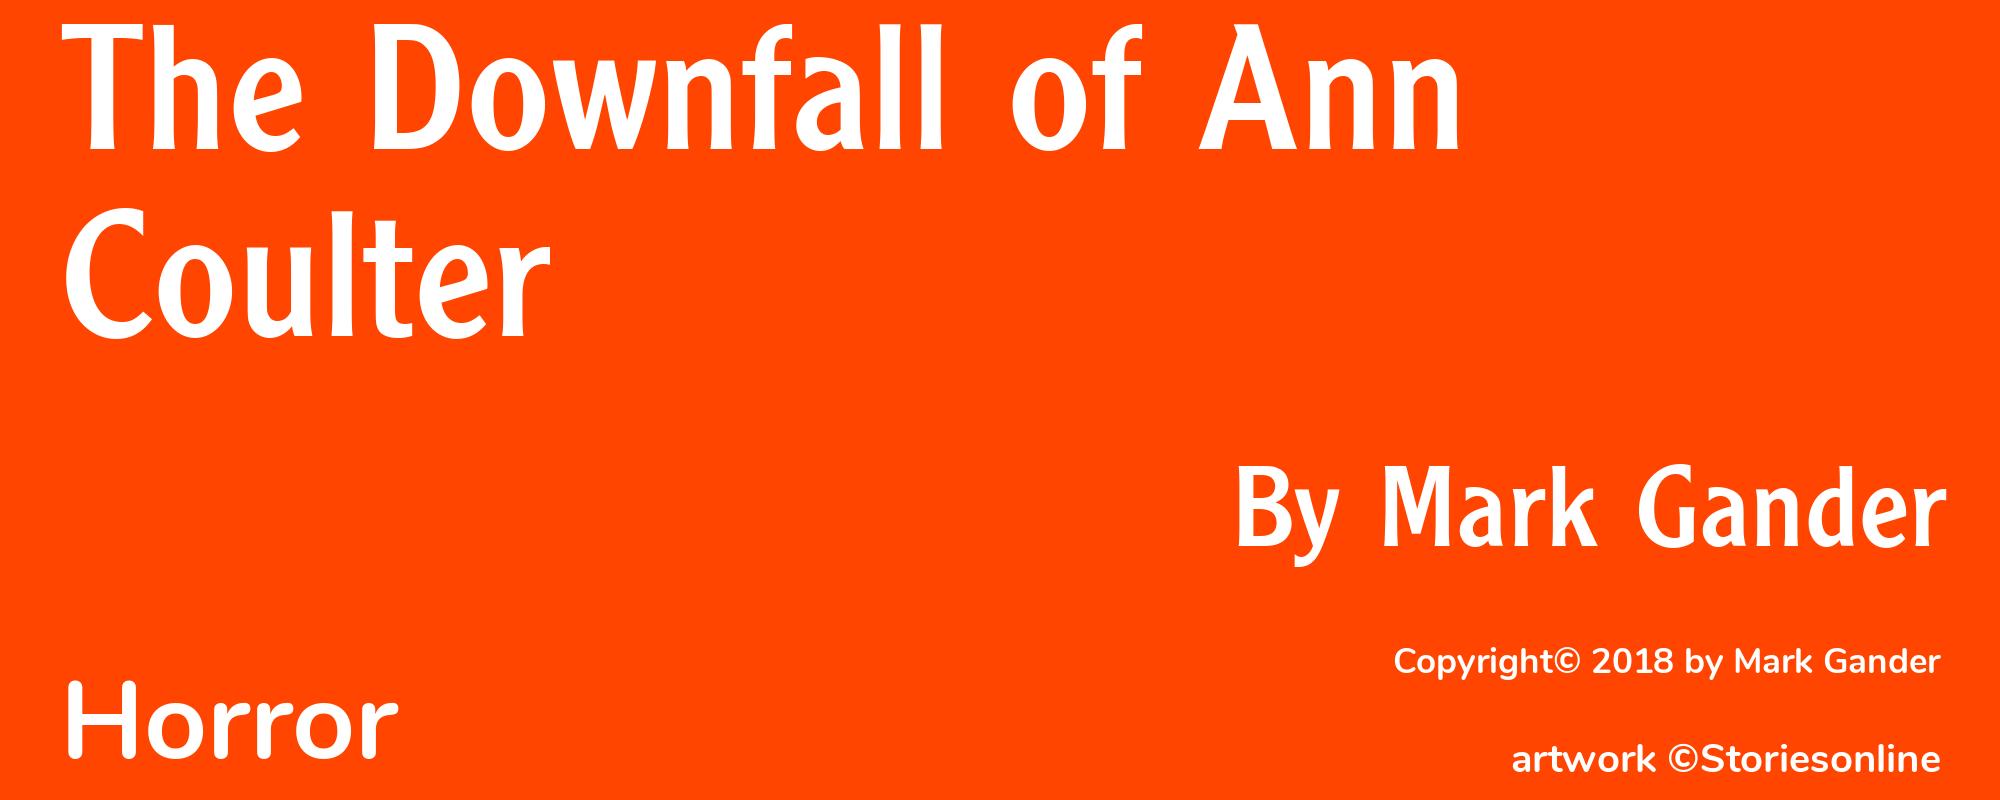 The Downfall of Ann Coulter - Cover